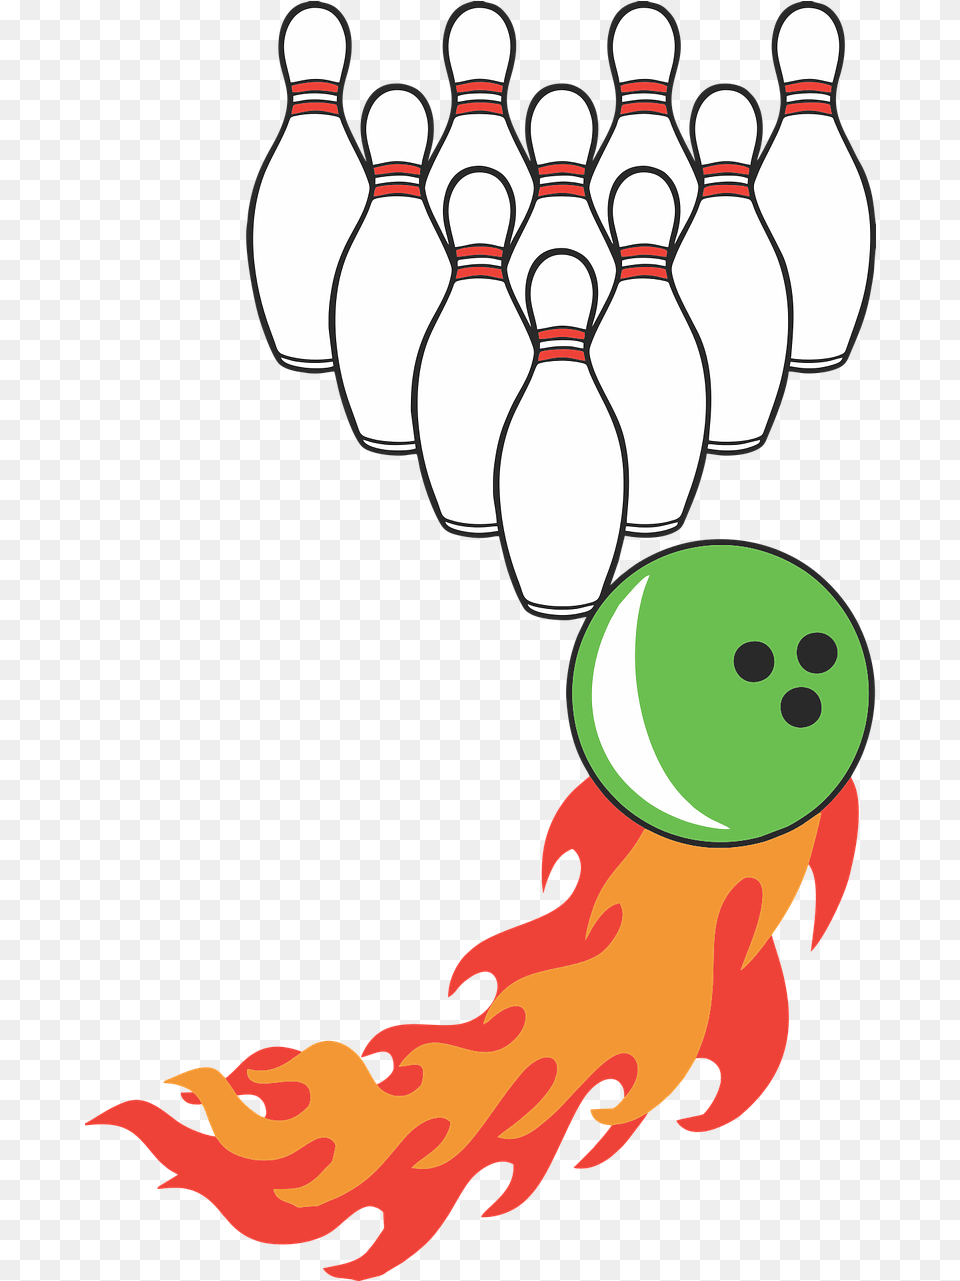 Bowlingbowling Ballbowling Pinbowlsport Image Transparent Animated Bowling People, Leisure Activities, Baby, Person Png